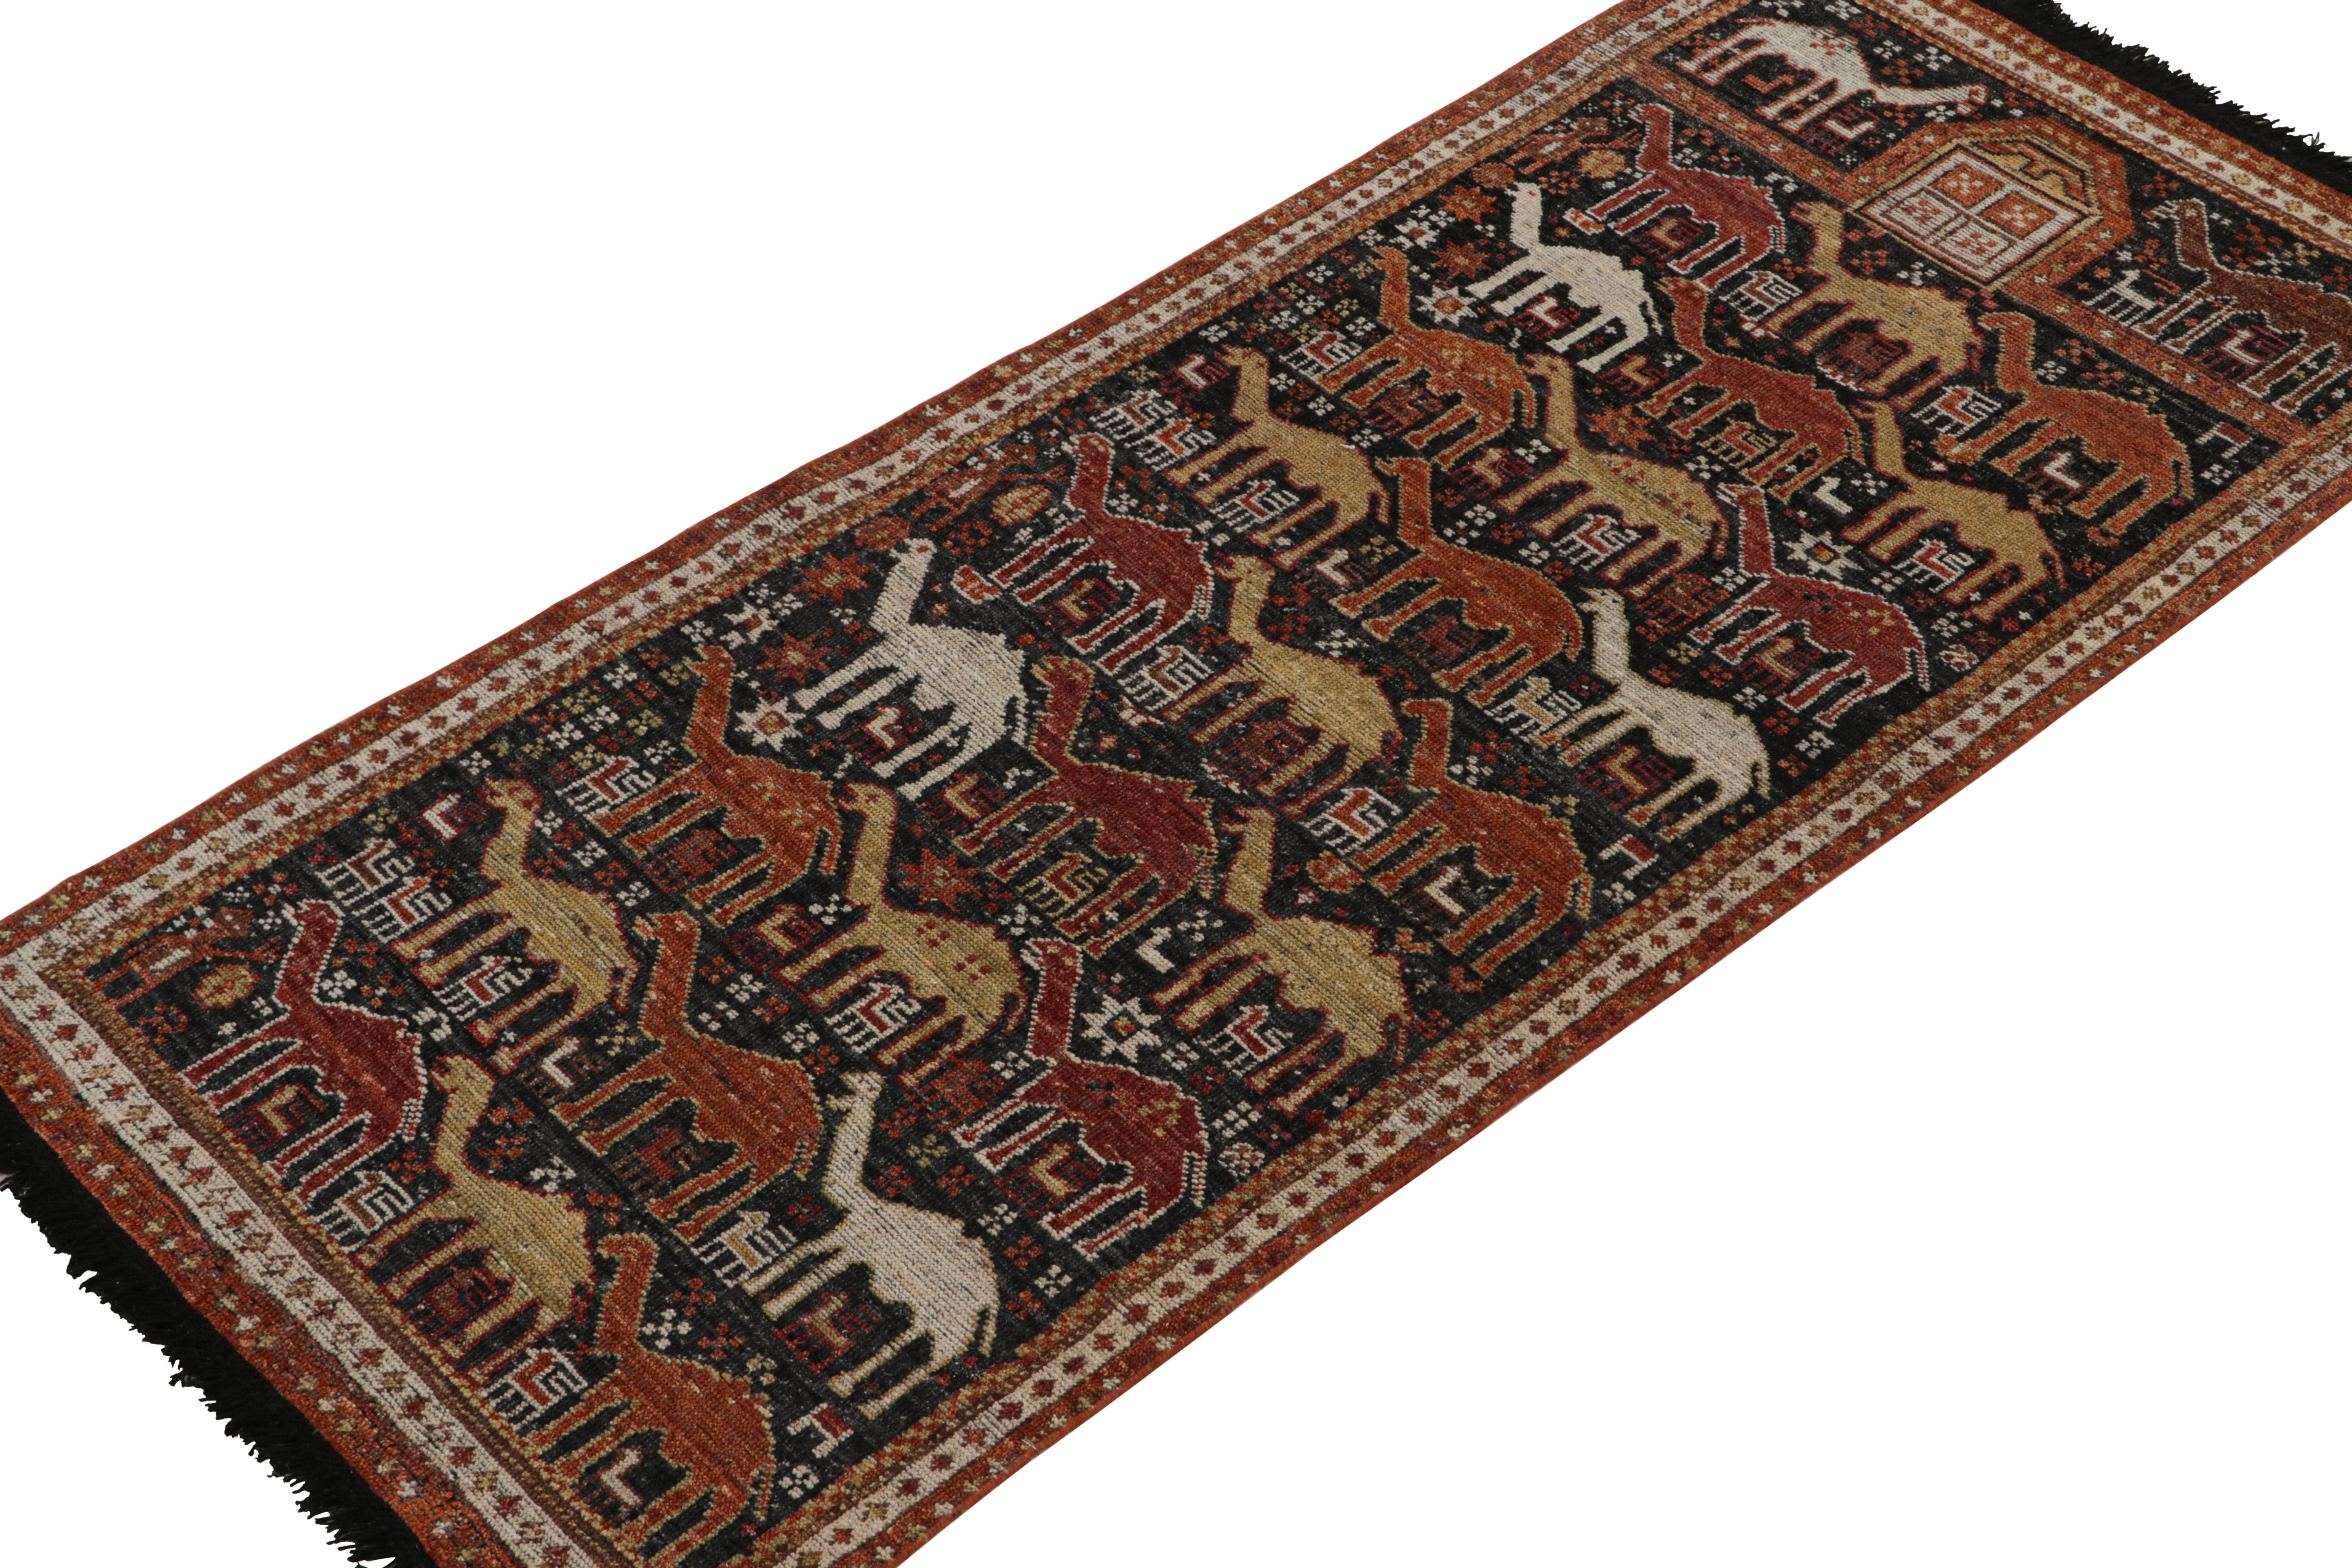 Indian Rug & Kilim’s Tribal style runner in Black with Red, Gold-Brown Pictorials For Sale